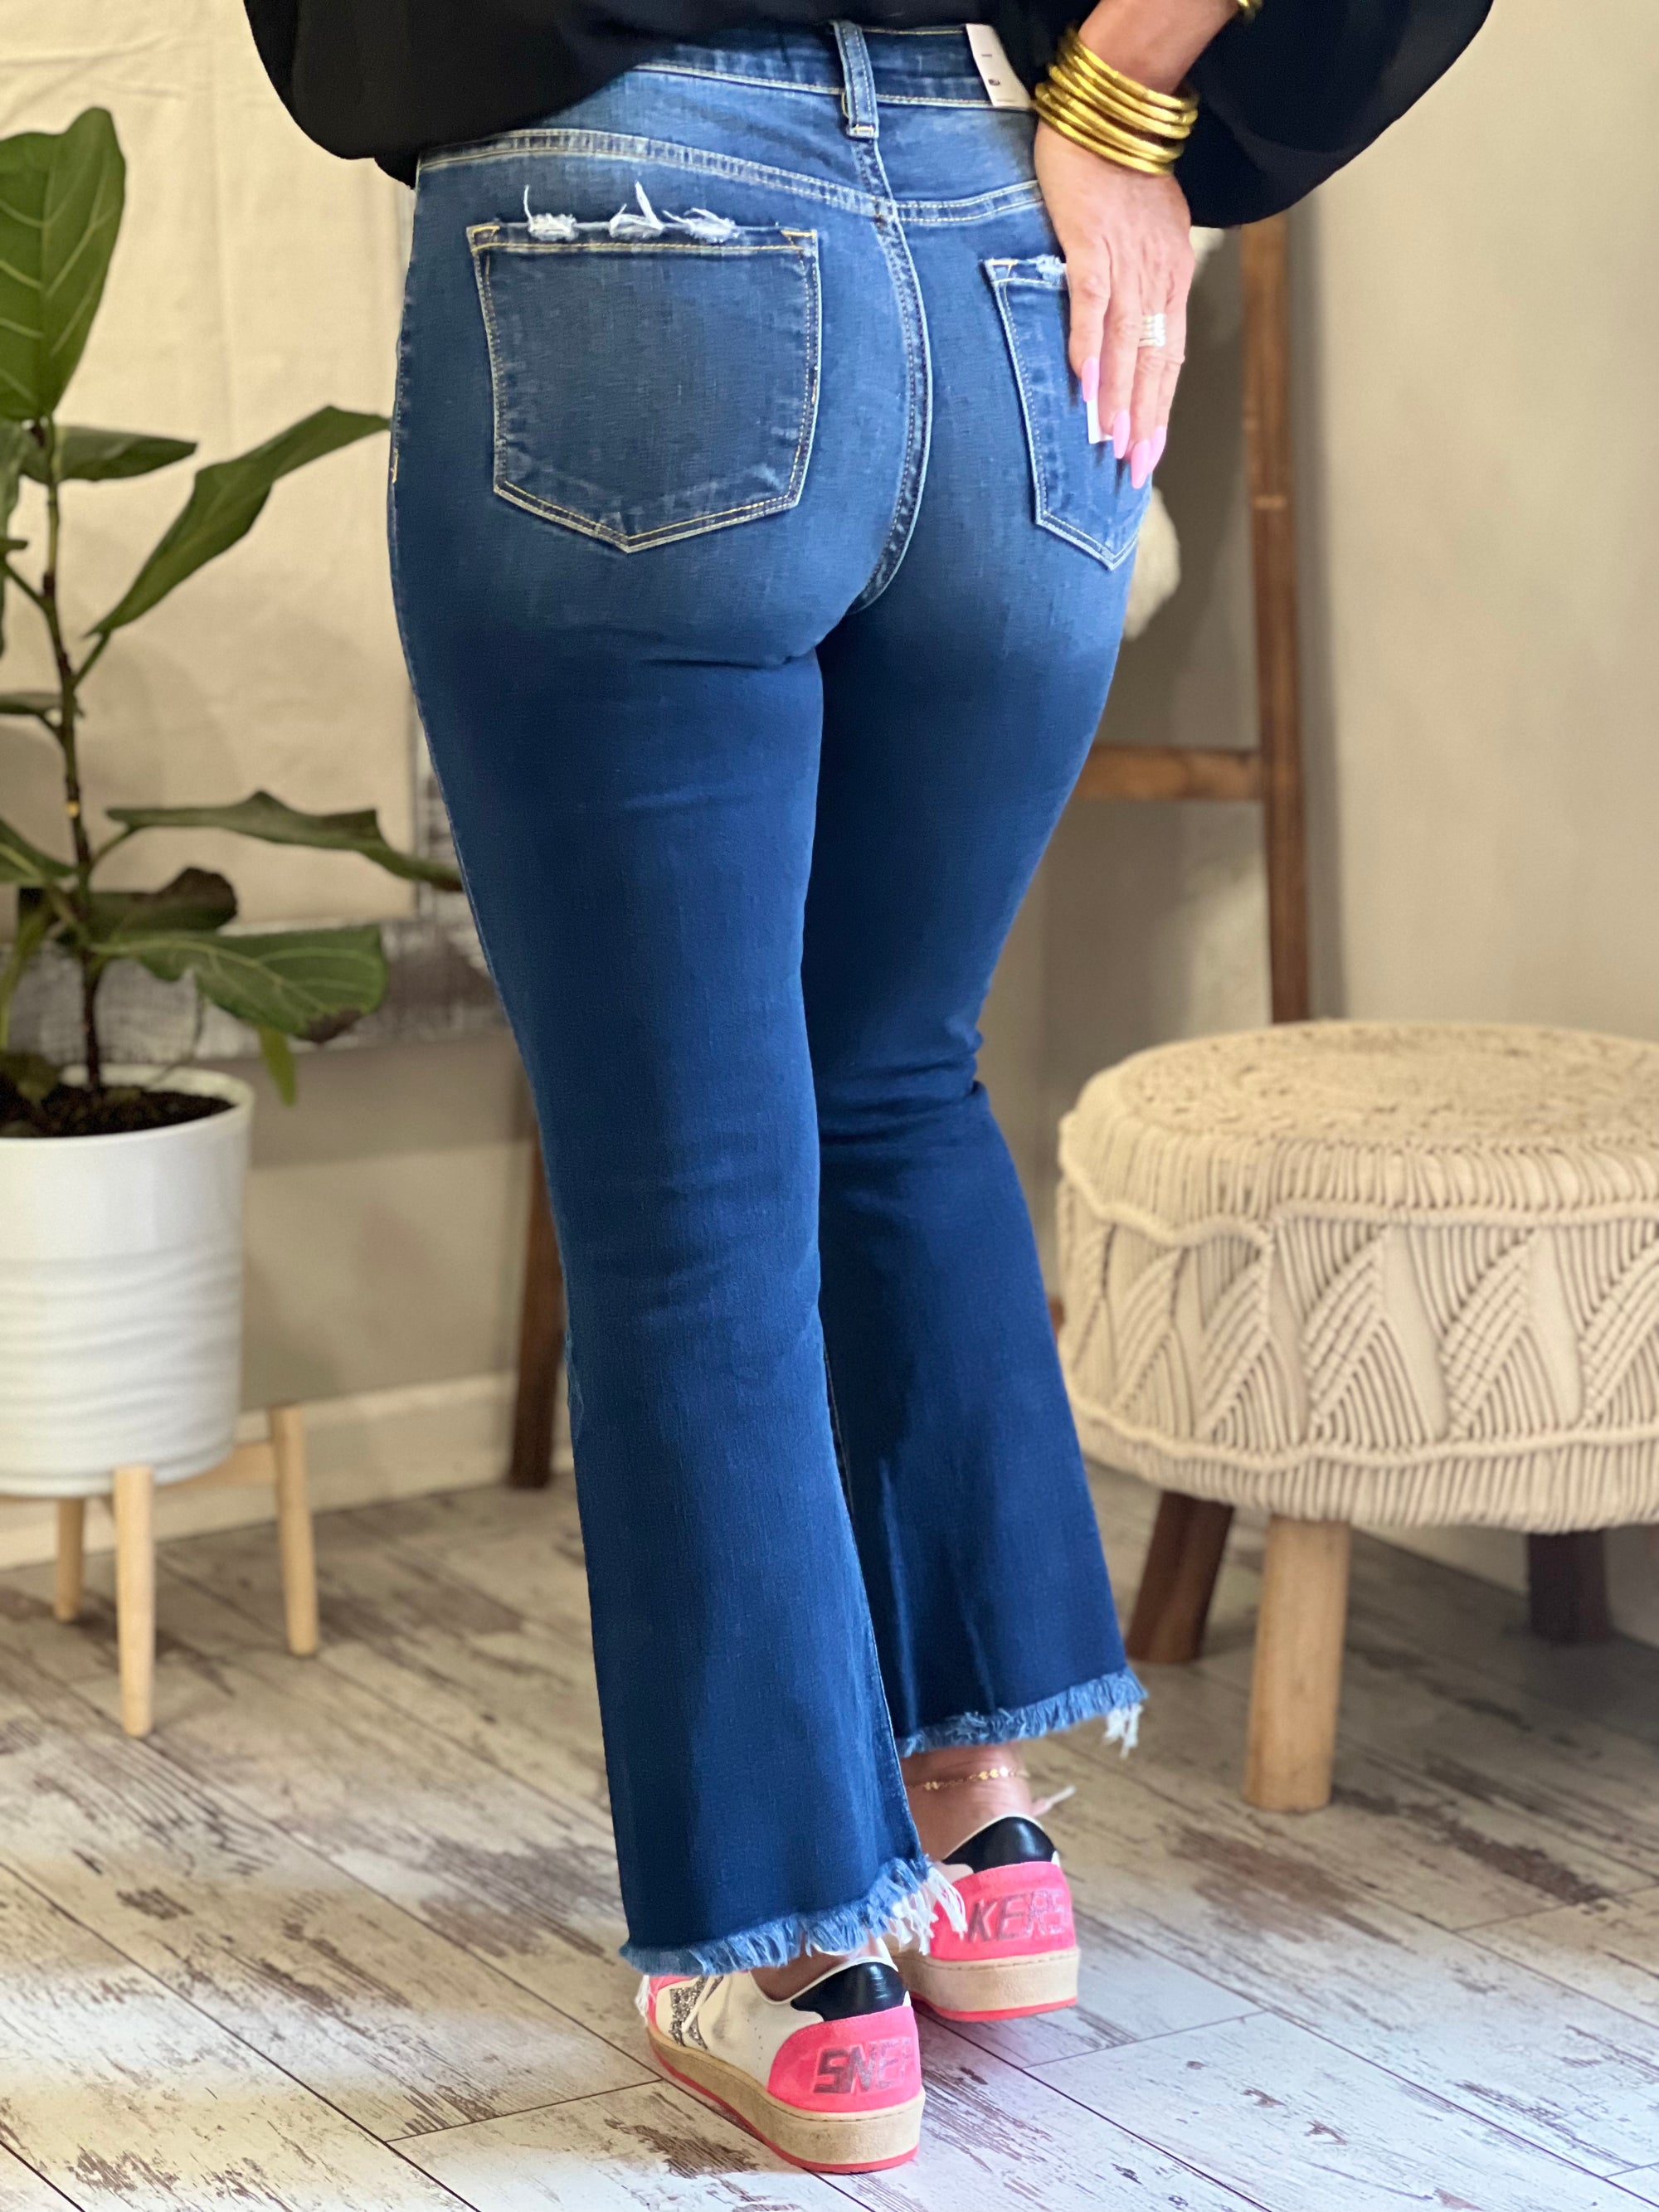 High Rise Cropped Kick Flare Jeans